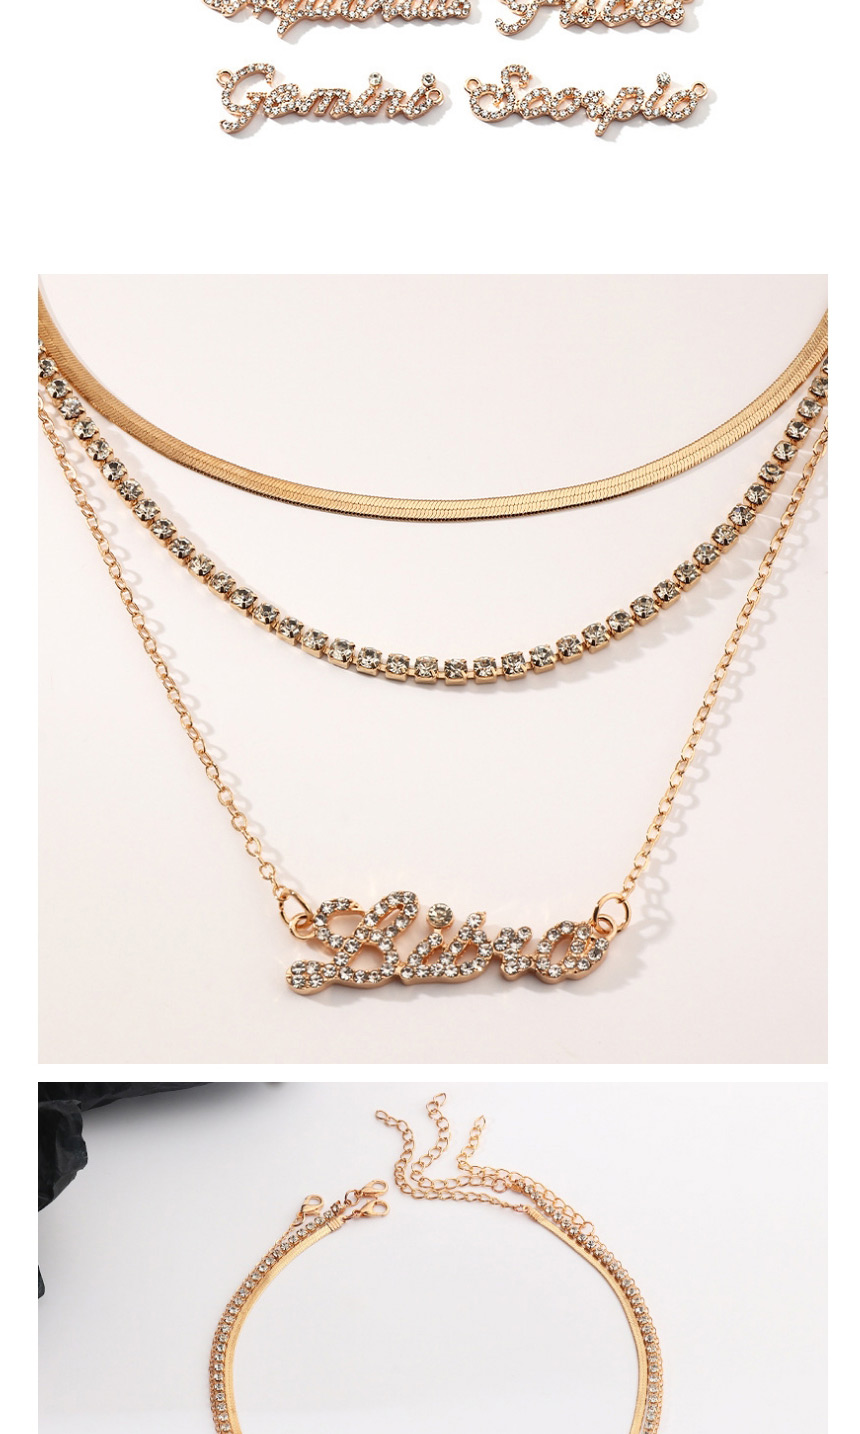 Fashion Aries Twelve Constellation Letters Multilayer Necklace With Diamonds,Pendants